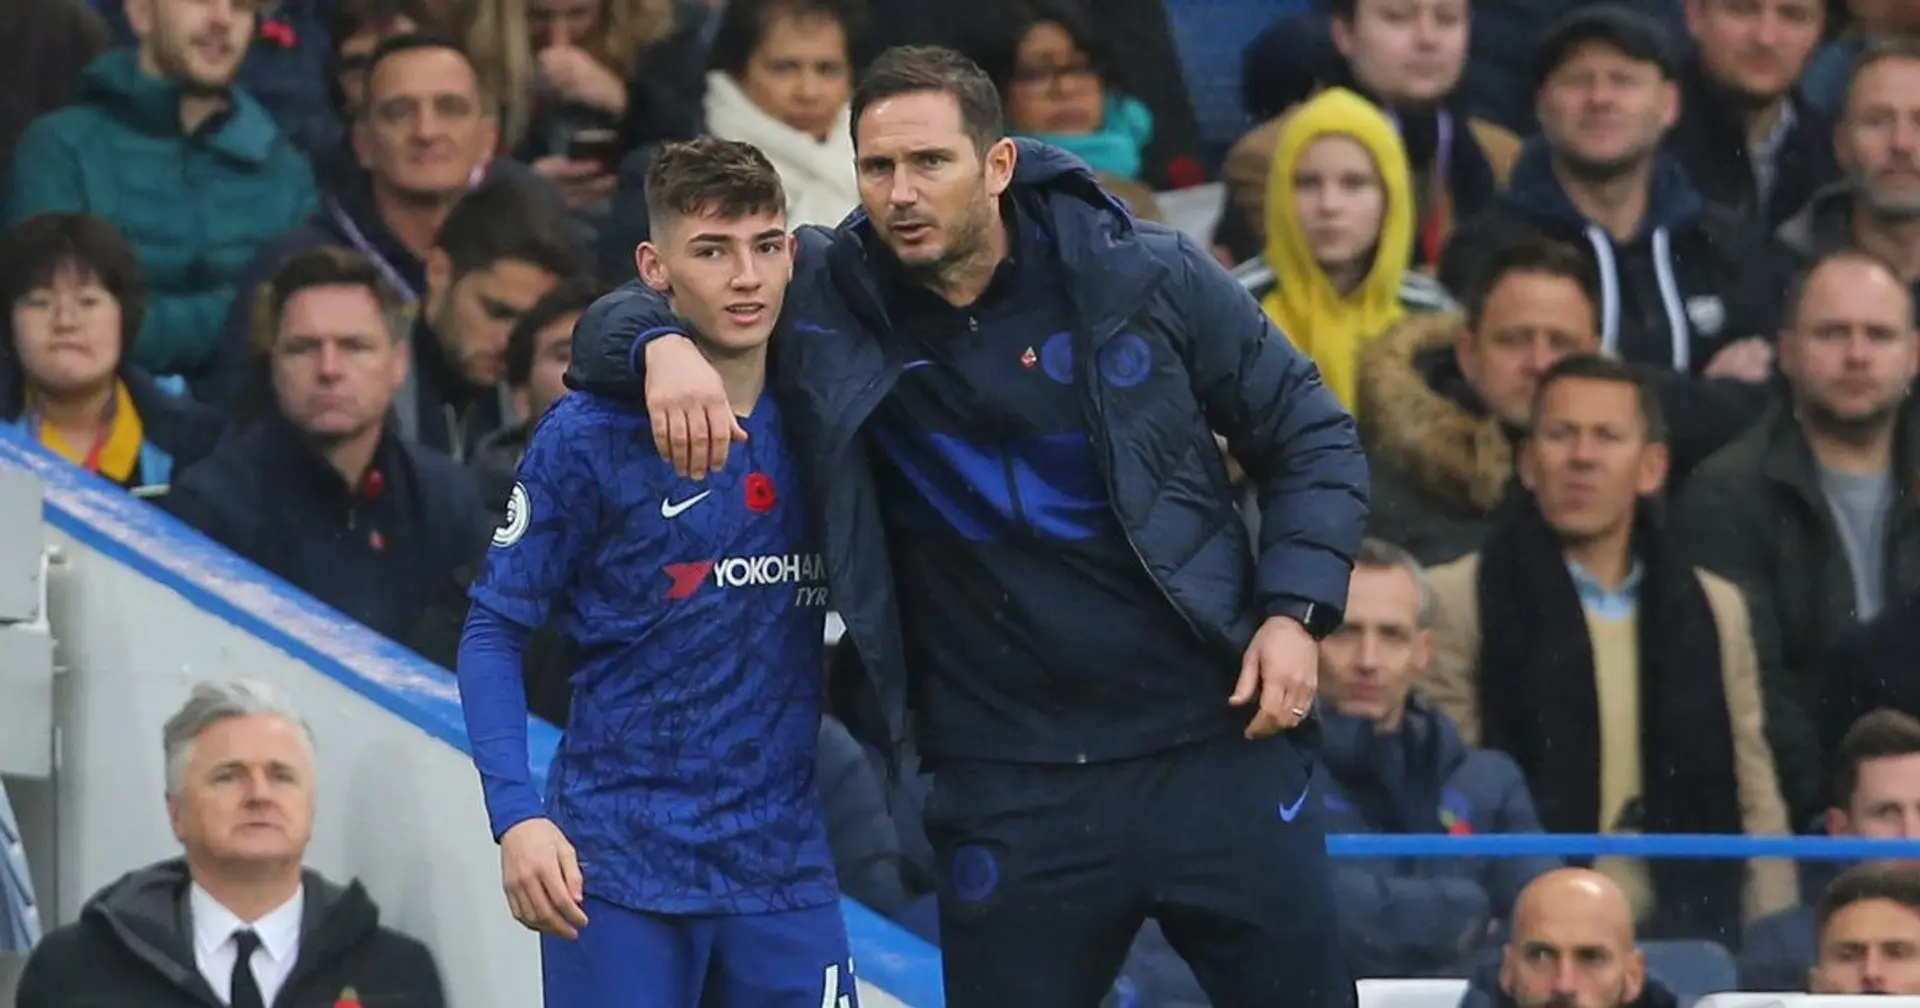 'It’s about making sure the pathway is right for him': Lampard addresses Gilmour loan rumours